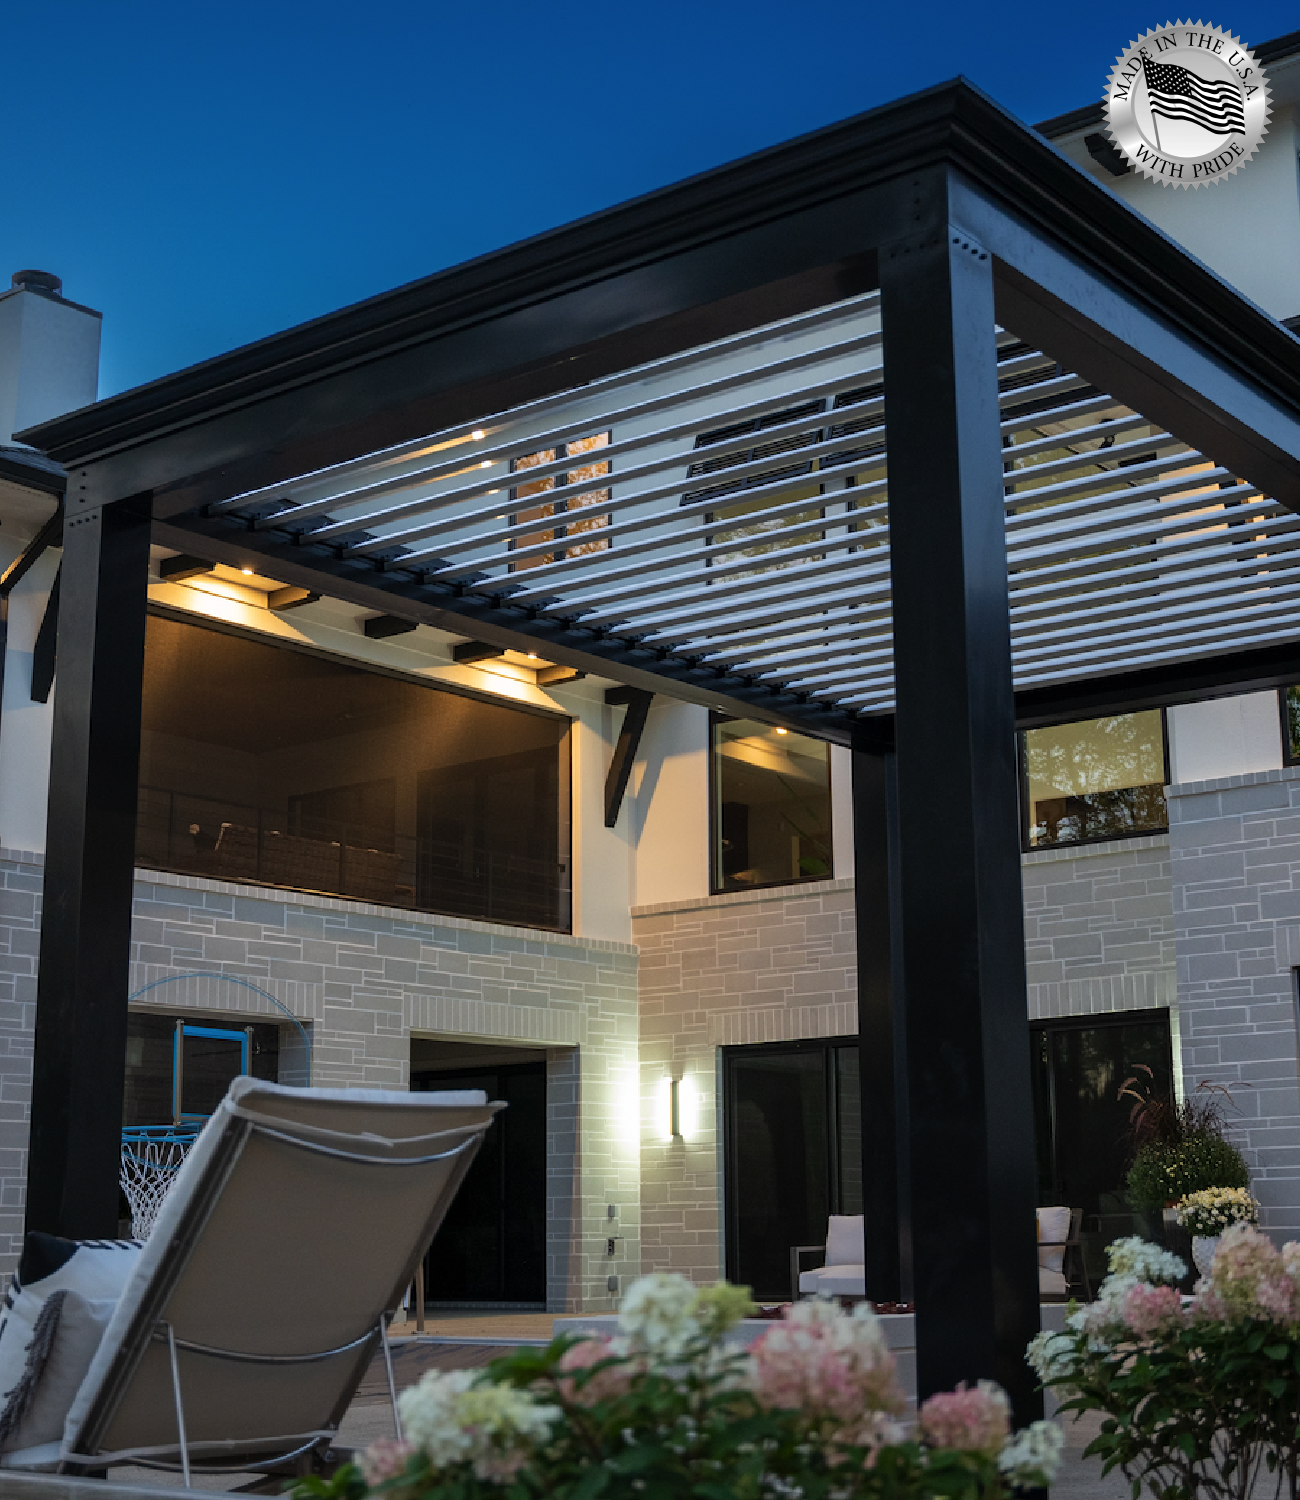 Pool House Made From Black Pergola